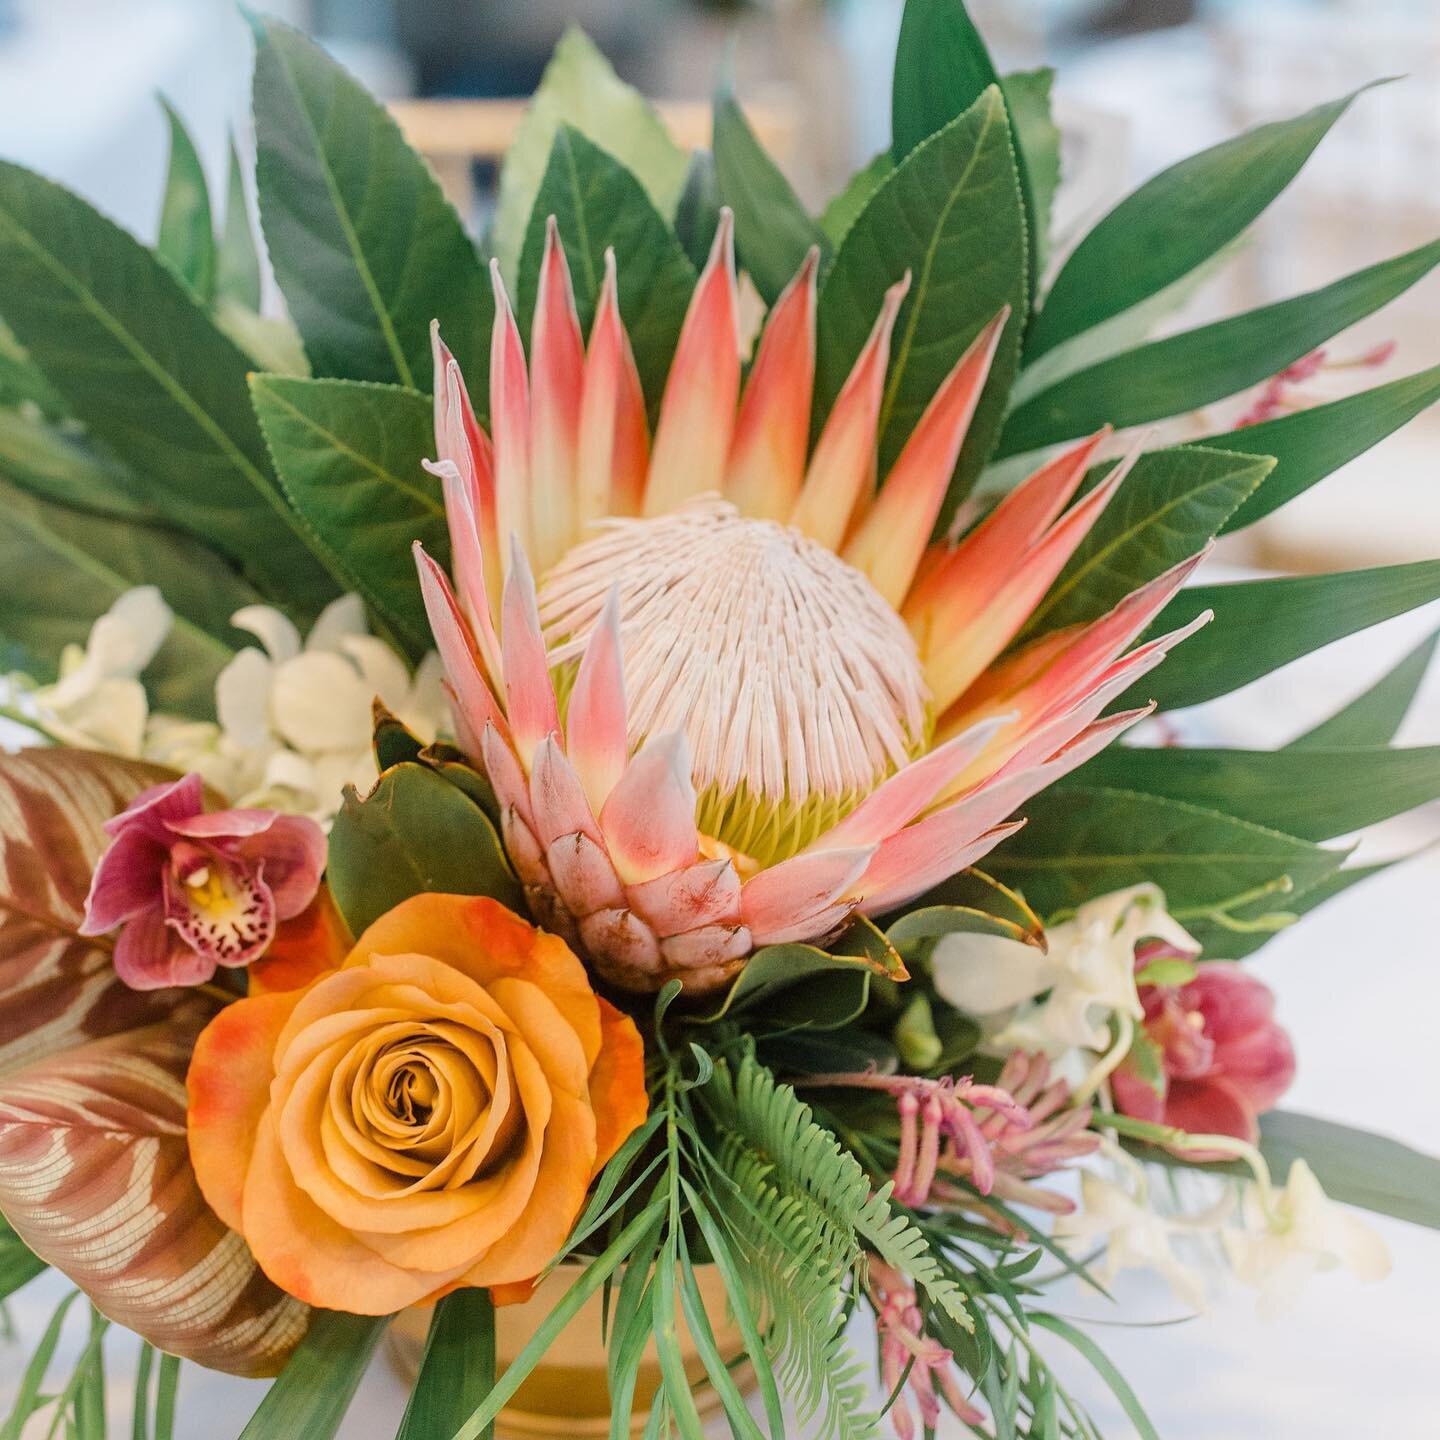 Mod tropical centerpieces for Christina &amp; Kolton: King Protea, symbol roses, &amp; those stripe-y calathea leaves&hellip;just *chefs kiss*🤌🏻